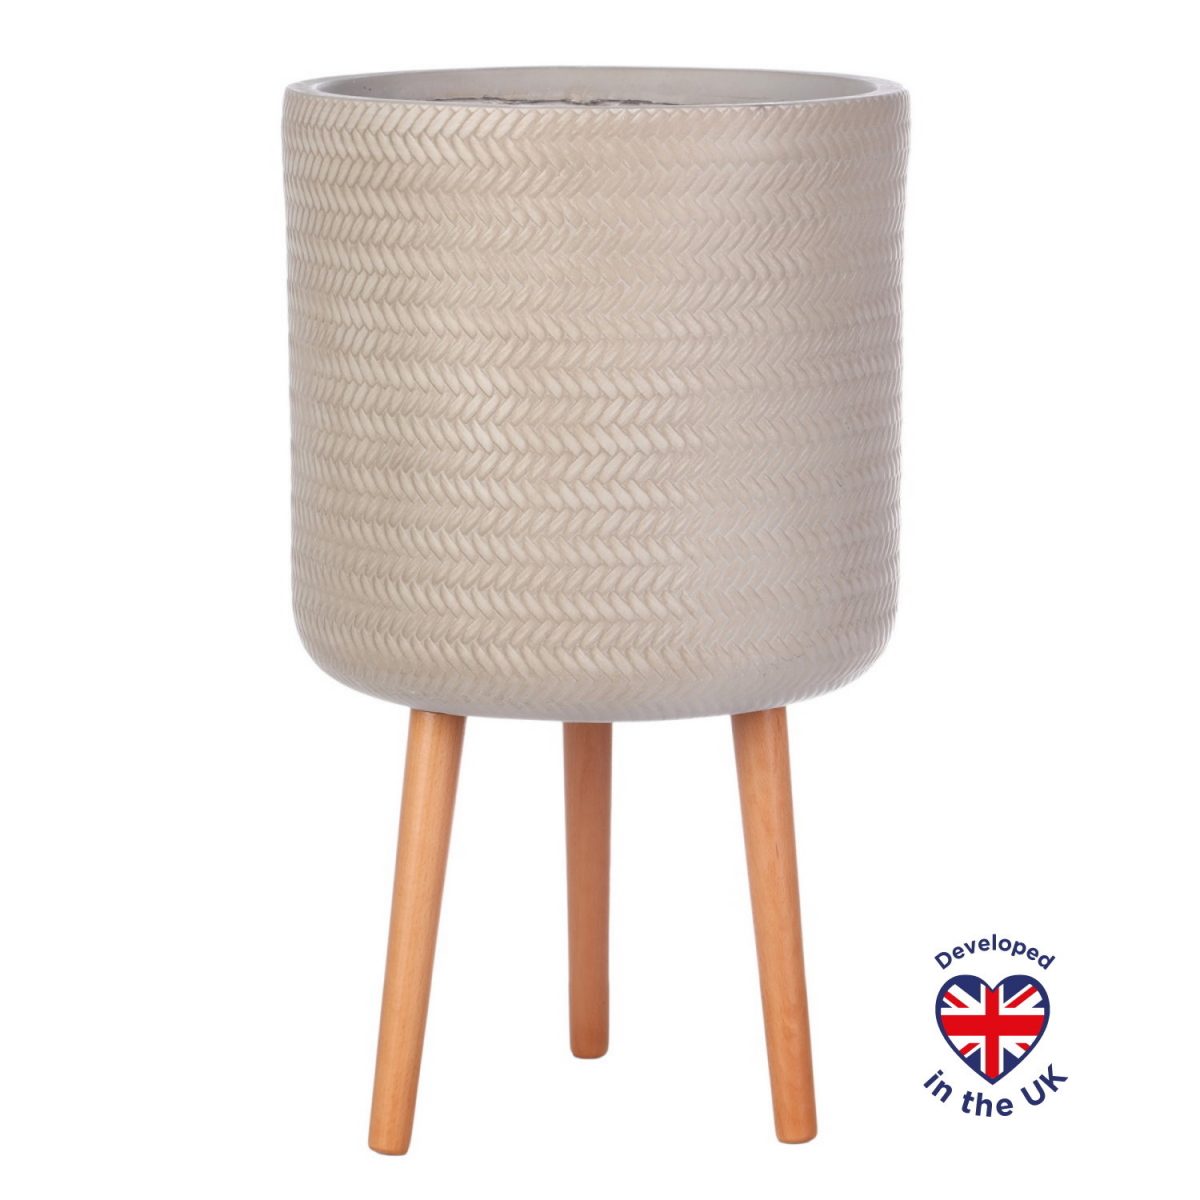 Plaited Style Beige Cylinder Round Indoor Planter with Legs D36 H62 cm, 30.9 ltrs Cap.